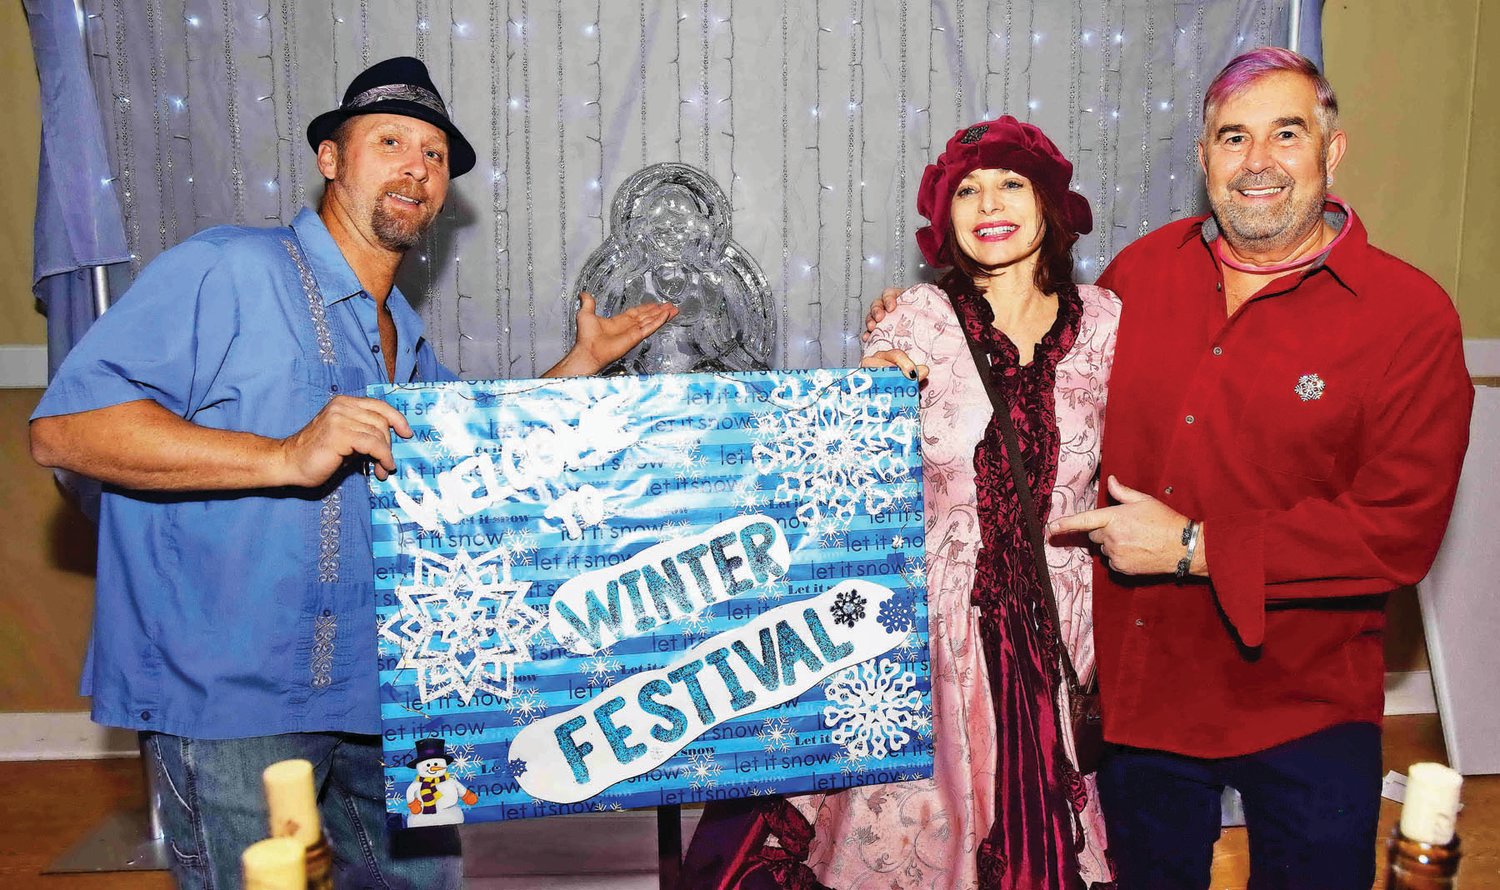 Fire and Ice co-chairs Glen Stephan and Marianne Romano and Winter Festival Chair Dudley Rice. Photograph by Gordon Nieburg